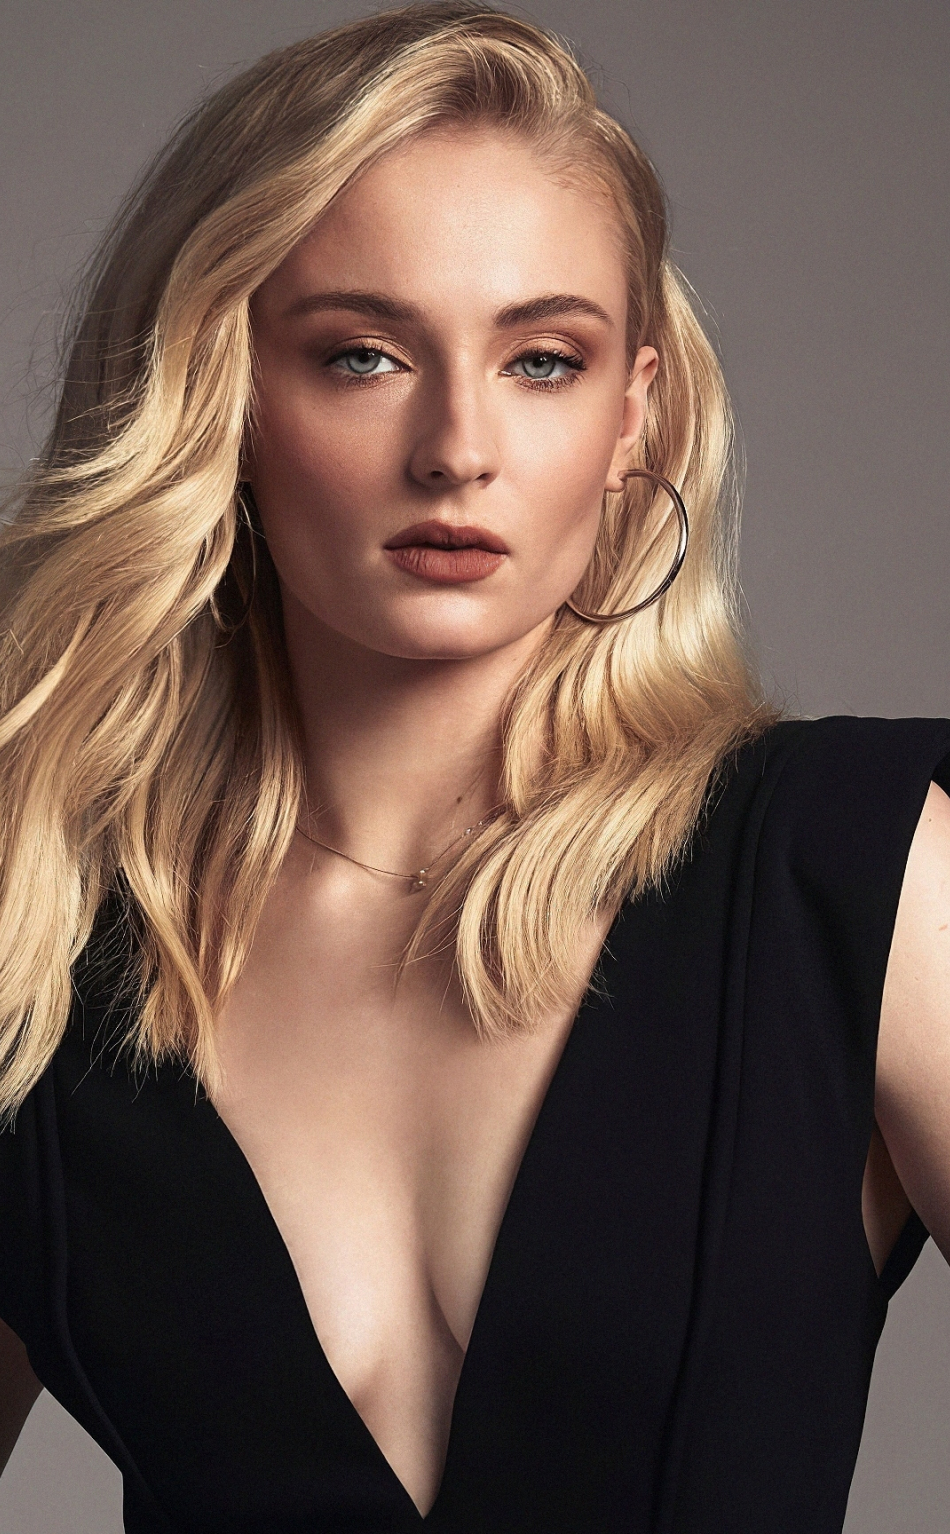 Download wallpaper 950x1534 famous actress, celebrity, sophie turner, iphone,  950x1534 hd background, 23777